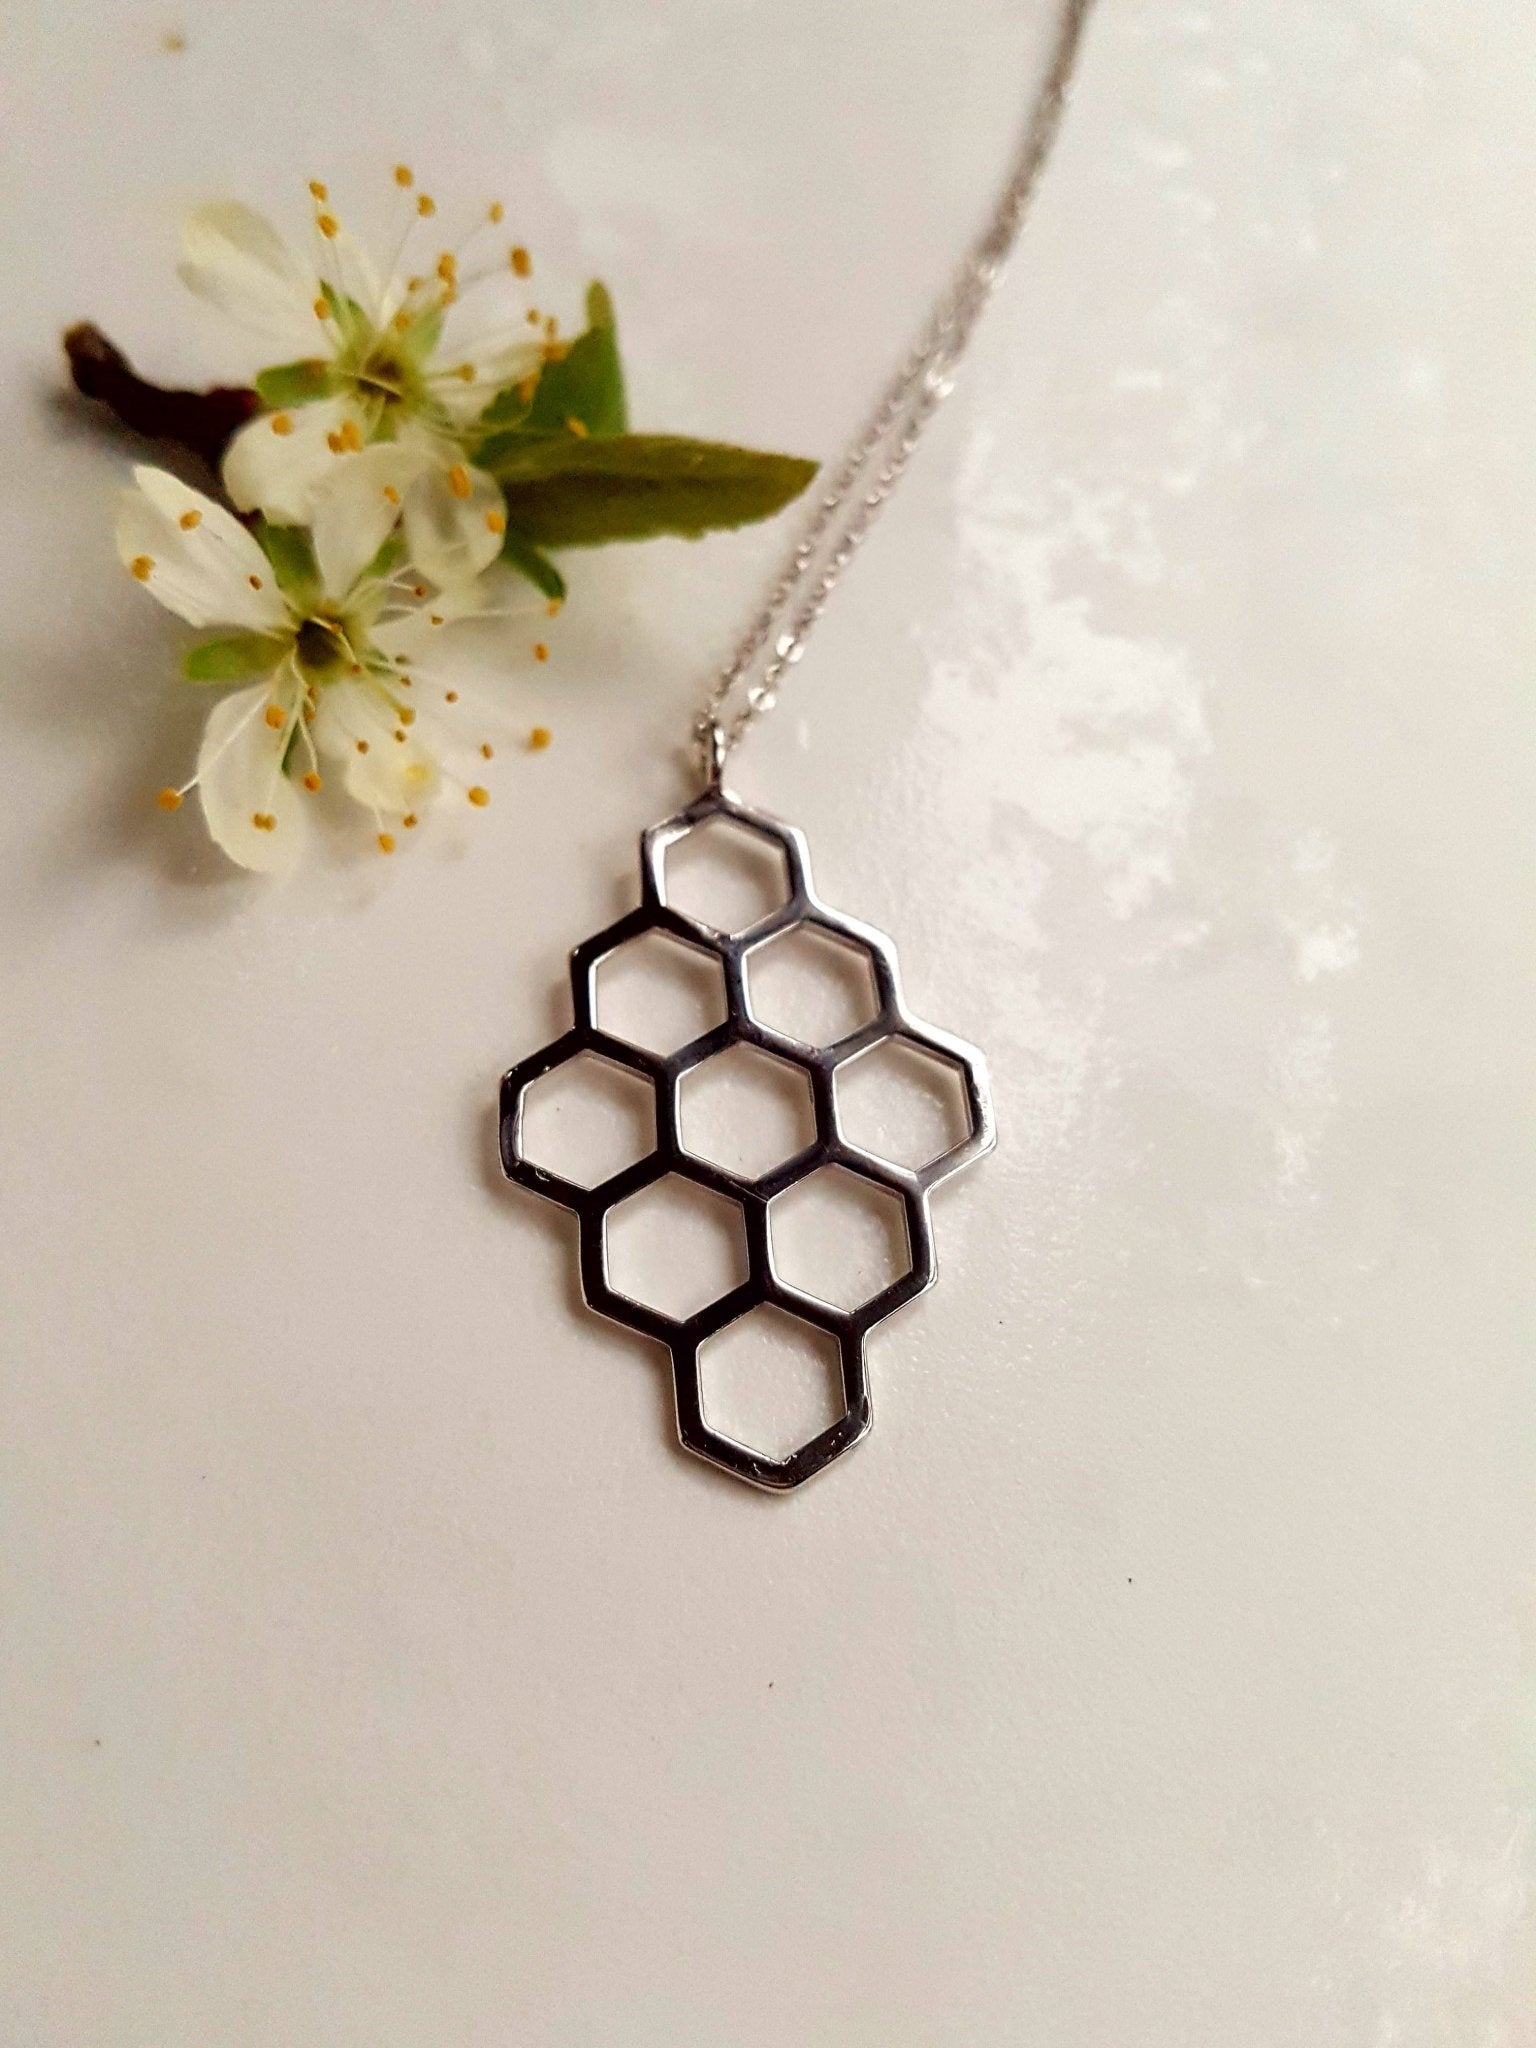 sterling silver honeycomb diamond-shaped pendant necklace with white background and flowers